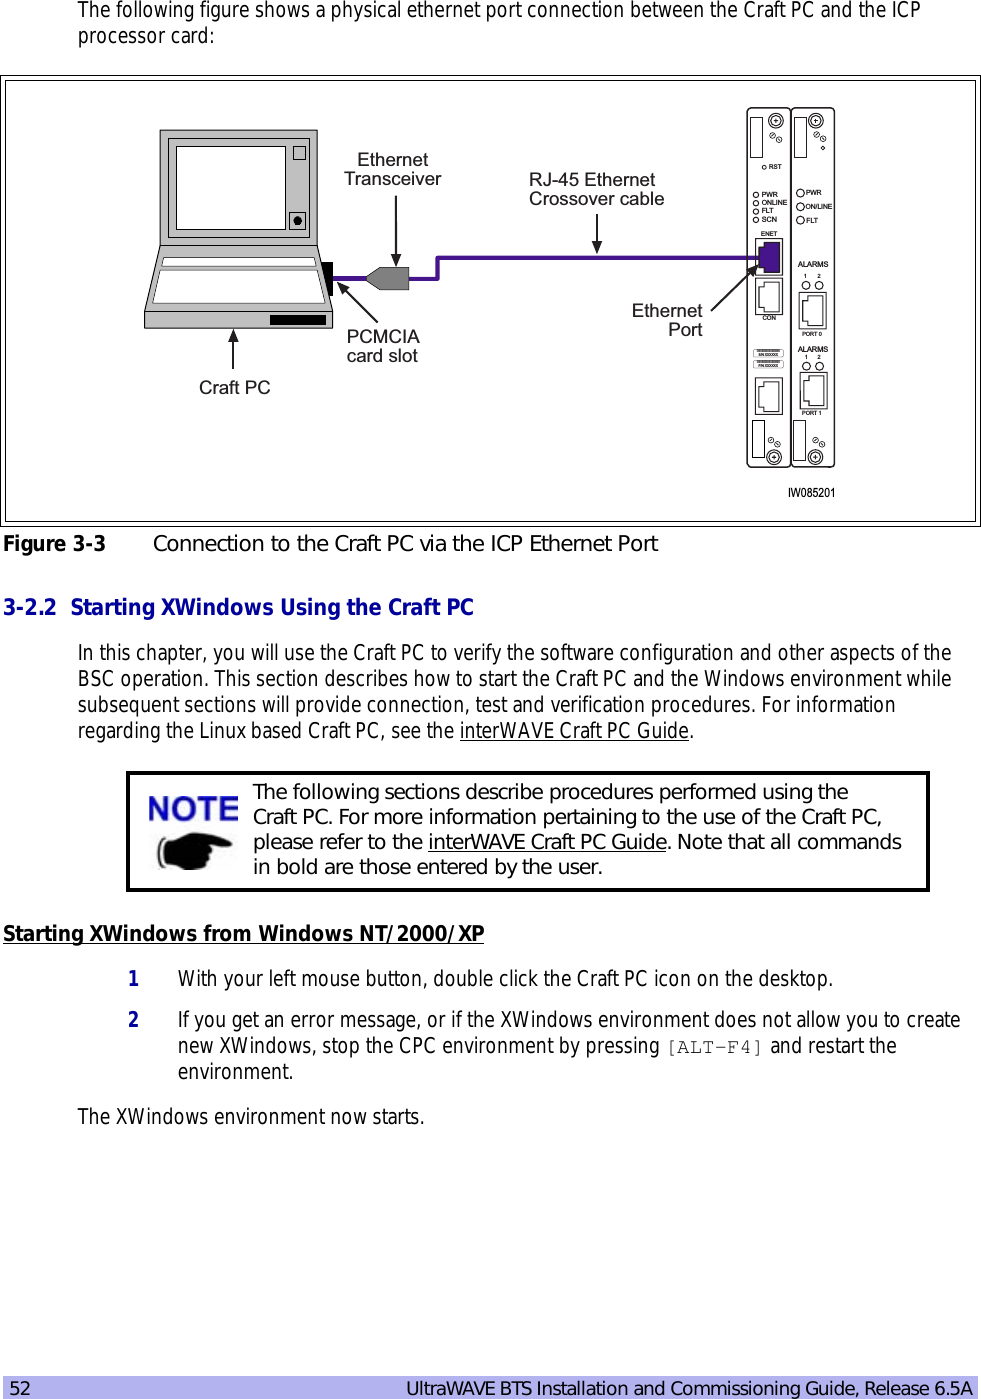 52   UltraWAVE BTS Installation and Commissioning Guide, Release 6.5AThe following figure shows a physical ethernet port connection between the Craft PC and the ICP processor card:C3-2.2  Starting XWindows Using the Craft PCIn this chapter, you will use the Craft PC to verify the software configuration and other aspects of the BSC operation. This section describes how to start the Craft PC and the Windows environment while subsequent sections will provide connection, test and verification procedures. For information regarding the Linux based Craft PC, see the interWAVE Craft PC Guide.Starting XWindows from Windows NT/2000/XP1With your left mouse button, double click the Craft PC icon on the desktop.2If you get an error message, or if the XWindows environment does not allow you to create new XWindows, stop the CPC environment by pressing [ALT-F4] and restart the environment.The XWindows environment now starts.Figure 3-3 Connection to the Craft PC via the ICP Ethernet PortThe following sections describe procedures performed using the Craft PC. For more information pertaining to the use of the Craft PC, please refer to the interWAVE Craft PC Guide. Note that all commands in bold are those entered by the user.IW085201EthernetPortRJ-45 EthernetCrossover cableEthernetTransceiverPCMCIAcard slotCraft PCON/LINEPORT 112PORT 012ALARMSFLTPWRALARMSIIIIIIIIIIIIIIIIIIIIIIIIIP/N XXXXXXONLINEPWRFLTSCNRSTCONENETIIIIIIIIIIIIIIIIIIIIIIIIIS/N XXXXXX